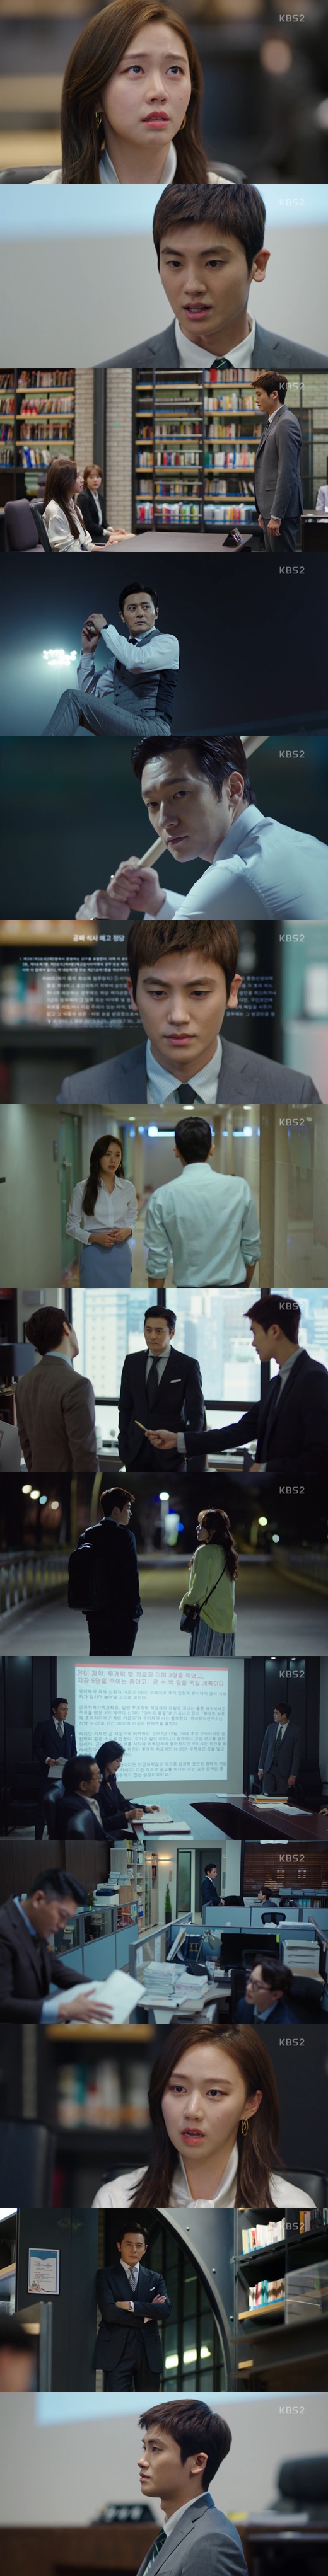 The relationship between Park Hyung-sik, a lawyer who chose loser for Ji-na Kim (Ko Sung-hee), is getting more and more interesting.In the 6th KBS 2TV tree drama Suits (playplayed by Kim Jung-min), which was broadcast on the night of the 10th, a trial of a law firm, which is the pre-dev of Ko Yeon-woo, was drawn.A mock court, an opportunity for new lawyers in law firms to reveal their skills.Ko Yeon-woo, following the advice of Miniforce Seok (Jang Dong-gun) who said, Before you go to trial, tried to draw an agreed without following the rules of the existing mock court.However, on the day of the mock court, Seo Ki-woong (Lee Tae-sun), the other sides lawyer, denied that he had agreed with Ko Yeon-woo. The trial began as scheduled, and Ko Yeon-woo, who is defenseless, was cornered.Of course, he was not being beaten. He turned Danger into an opportunity in a way that made another new rule.A mock court resumed a few days later. Ko Yeon-woo, the one who helps within the law firm, asked Se-hee (Lee Si-won) to play the role of Innocent Witness.Miniforce, who pretended to be indifferent to the Do not take out the mock court story, also encouraged Ko Yeon-woo, saying, This is not a mock court, but a first game.The trial seemed to flow as Ko Yeon-woo intended, when Se-hee brought up the story of the rabbit in the process of being questioned by Seo Ki-woong.This was the secret of Ji-na Kim and Ko Yeon-woo, and Ji-na Kim felt a great betrayal to Ko Yeon-woo.And Ko Yeon-woo was interrogated by Ji-na Kim, who was in charge of Innocent Witness of Seo Ki-woong.Ji-na Kim, who had a heightened Feeling, showed tears, and Ko did not fly a last blow to Ji-na Kim in a situation where he could decide to win.Asked by Kang Ha-yeon (Jin Hee-kyung), Are you really going to stop?, Ko Yeon-woo replied, Yes and the trial ended with his defeat.Until the mock court, Ko Yeon-woo and Ji-na Kim had a subtle flow of air, but they could not be defined.After the first meeting, a small secret developed into a Gong Yoo, but the moment the two people were getting closer, Sehee appeared.Their relationship fell into Danger due to the rabbit remarks that appeared during the trial: the trust of the small secret that created the two peoples present was broken.On the other hand, because Ji-na Kim could not hurt more, Ko Yeon-woo gave up the trial and Se-hee watched it, which is also a reversal factor that will make a big difference in the twisted relationship.It is as interesting as the romance of Miniforce and Ko Yeon-woo, and it is interesting how the relationship between Ji-na Kim and Ko Yeon-woo will develop in the future.